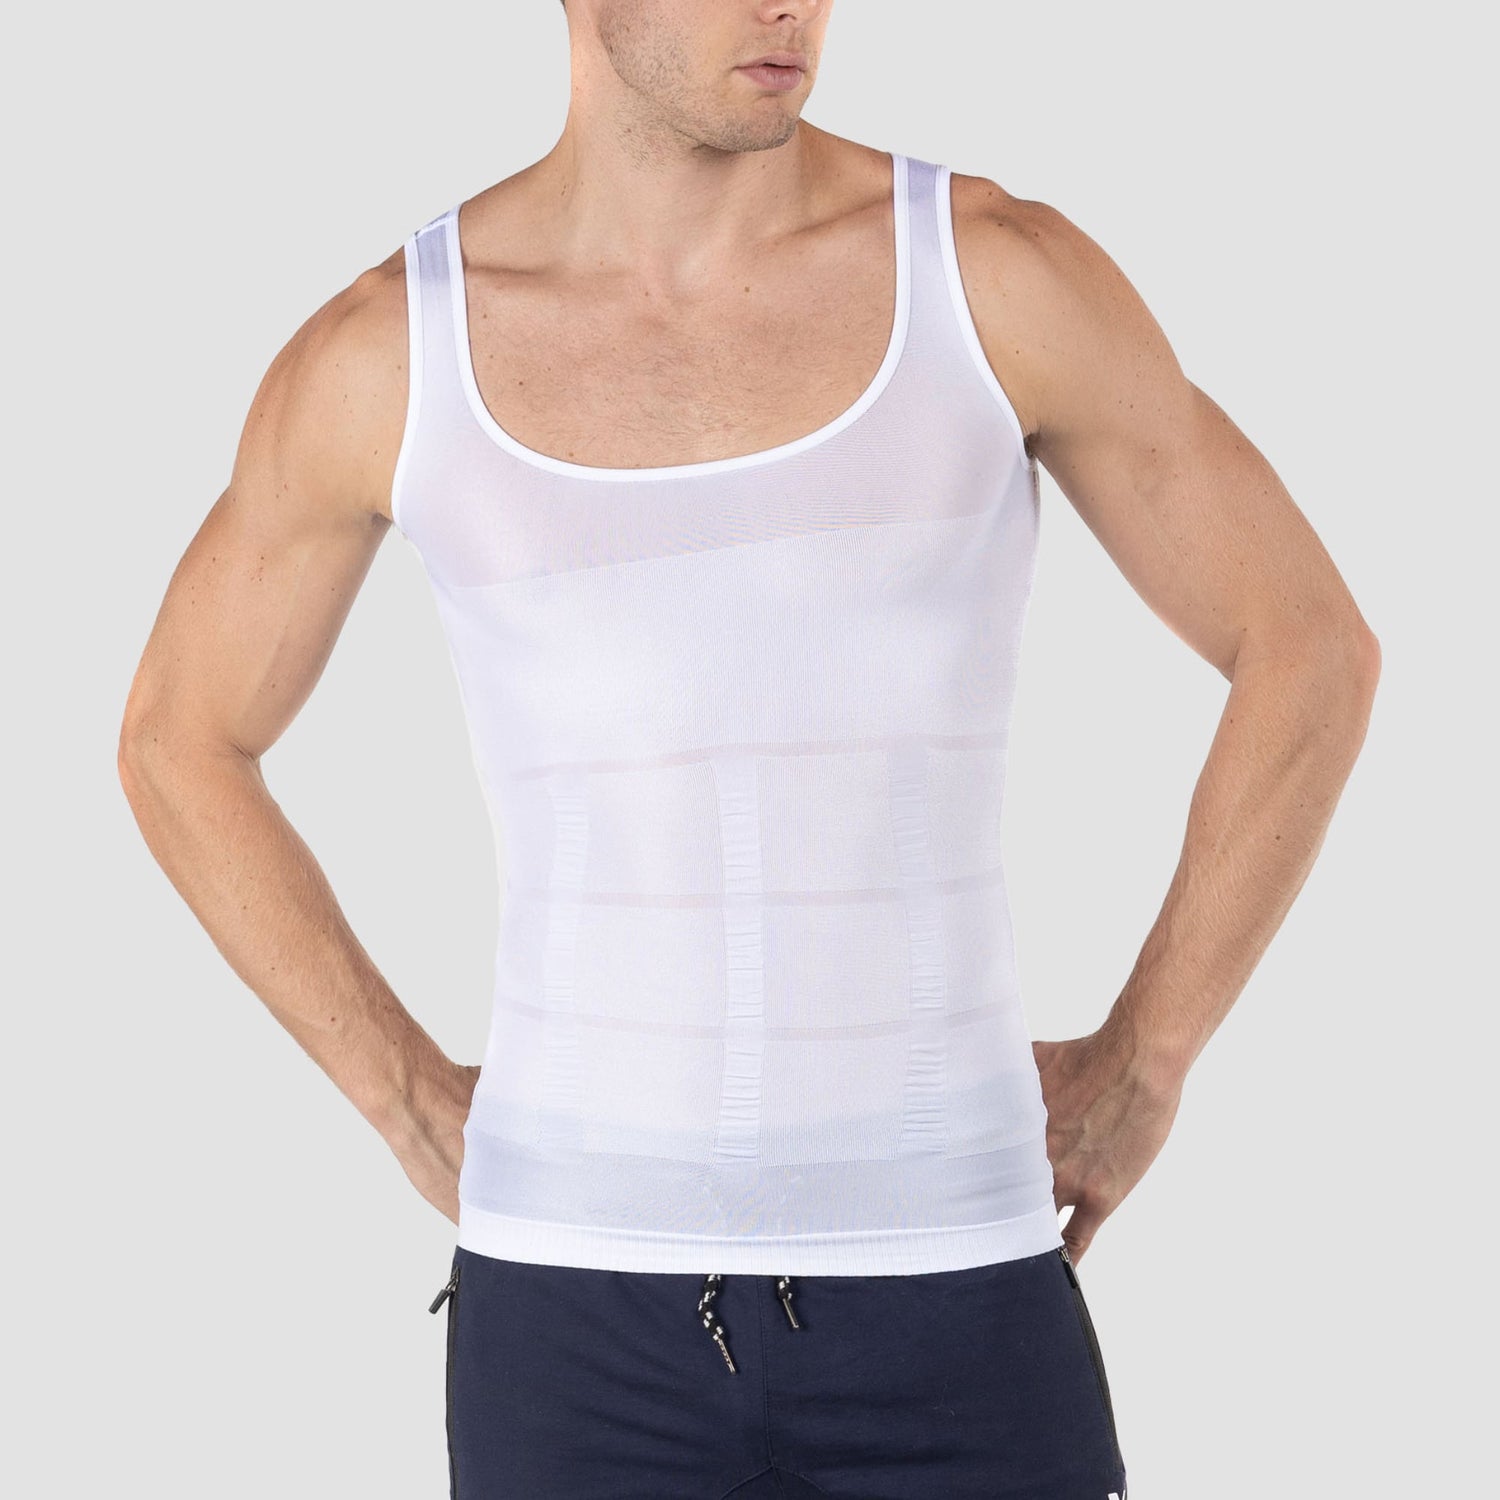 Up To 75% Off on Mens Slimming Body Shaper Ves